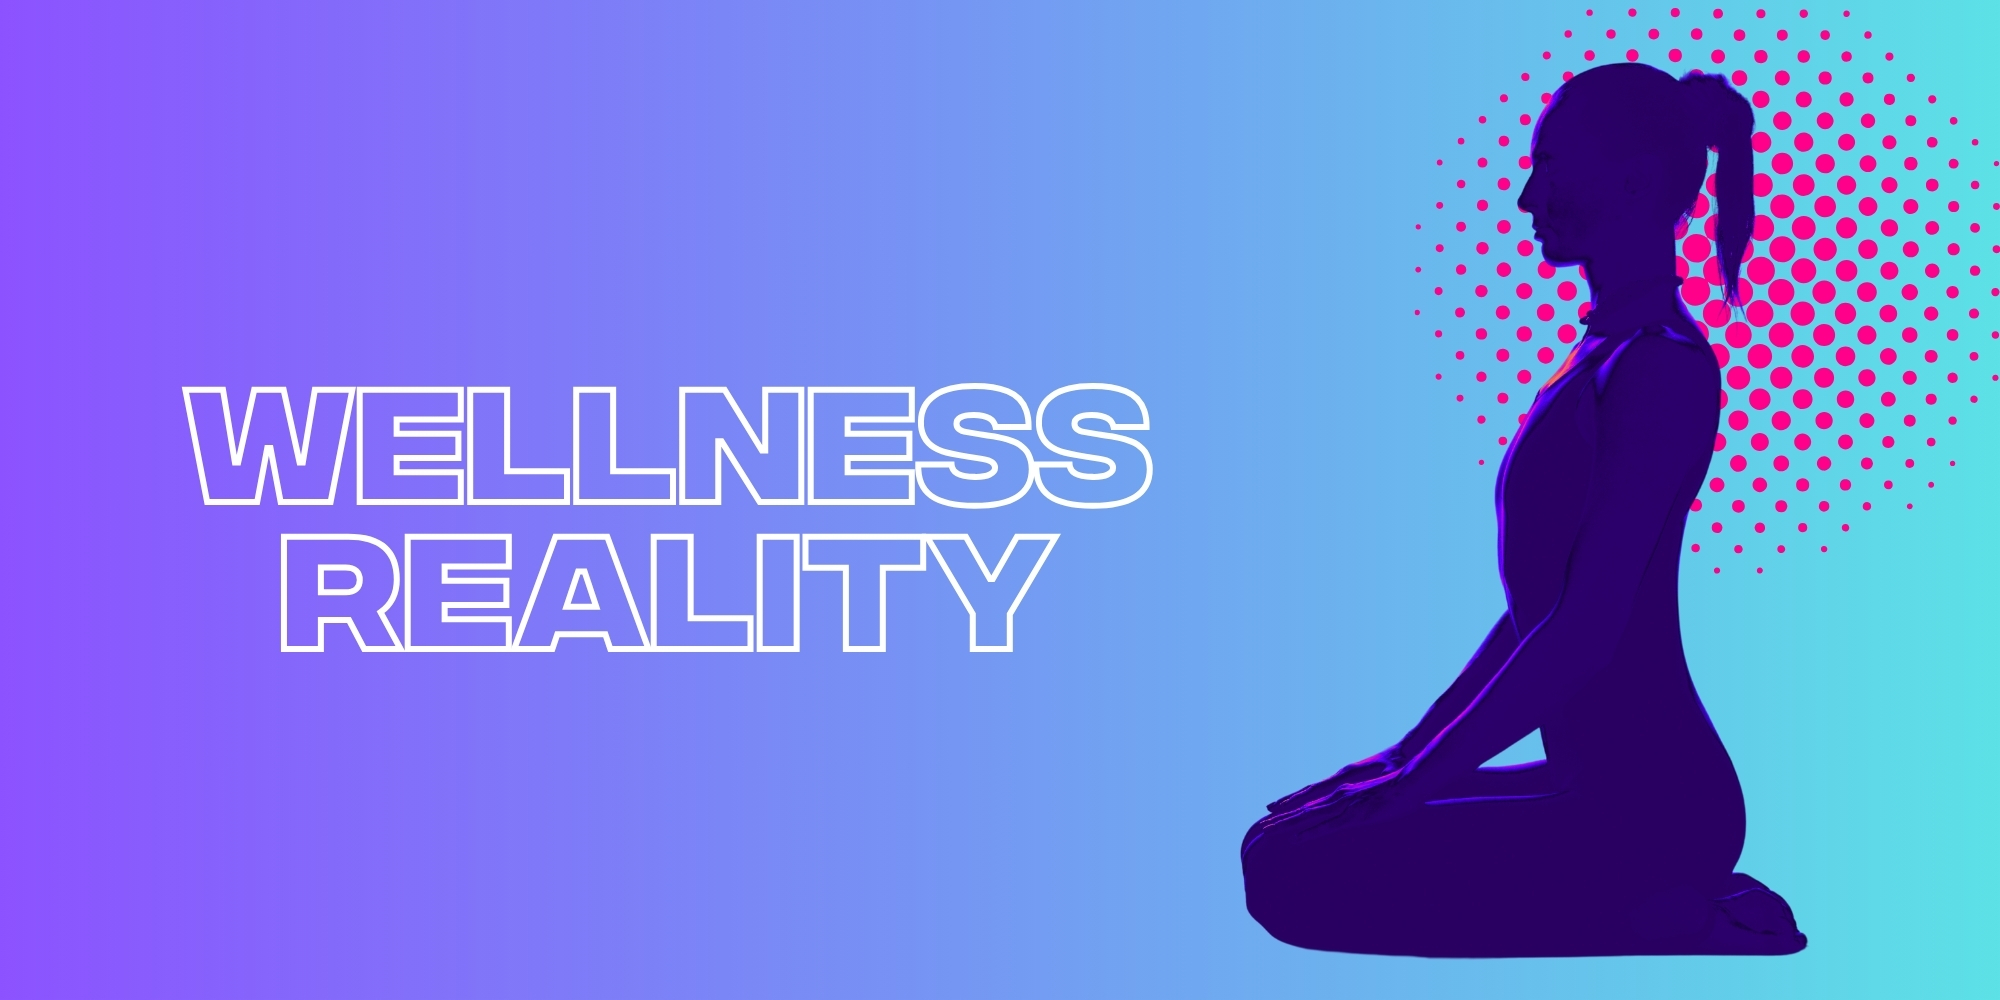 Is The Wellness Industry Only Making Us More Sick?